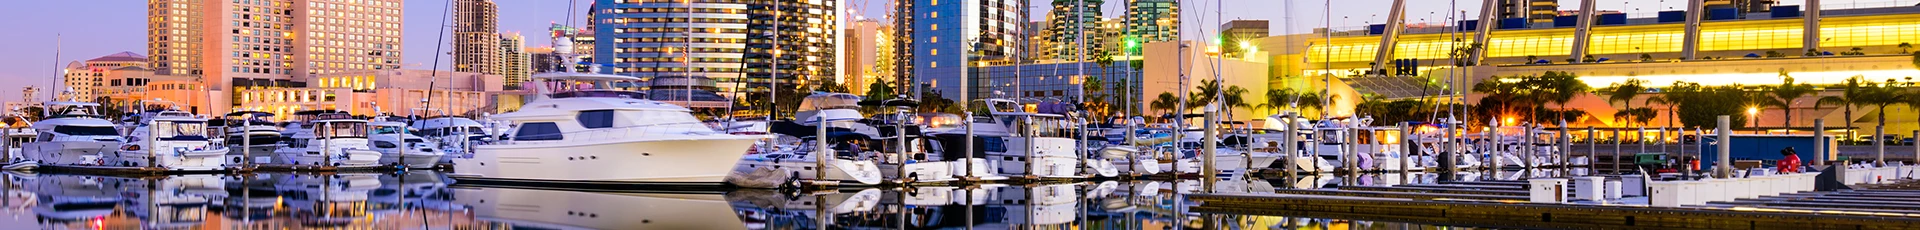 Boat Removal, Dismantle and Disposal in Seminole Florida